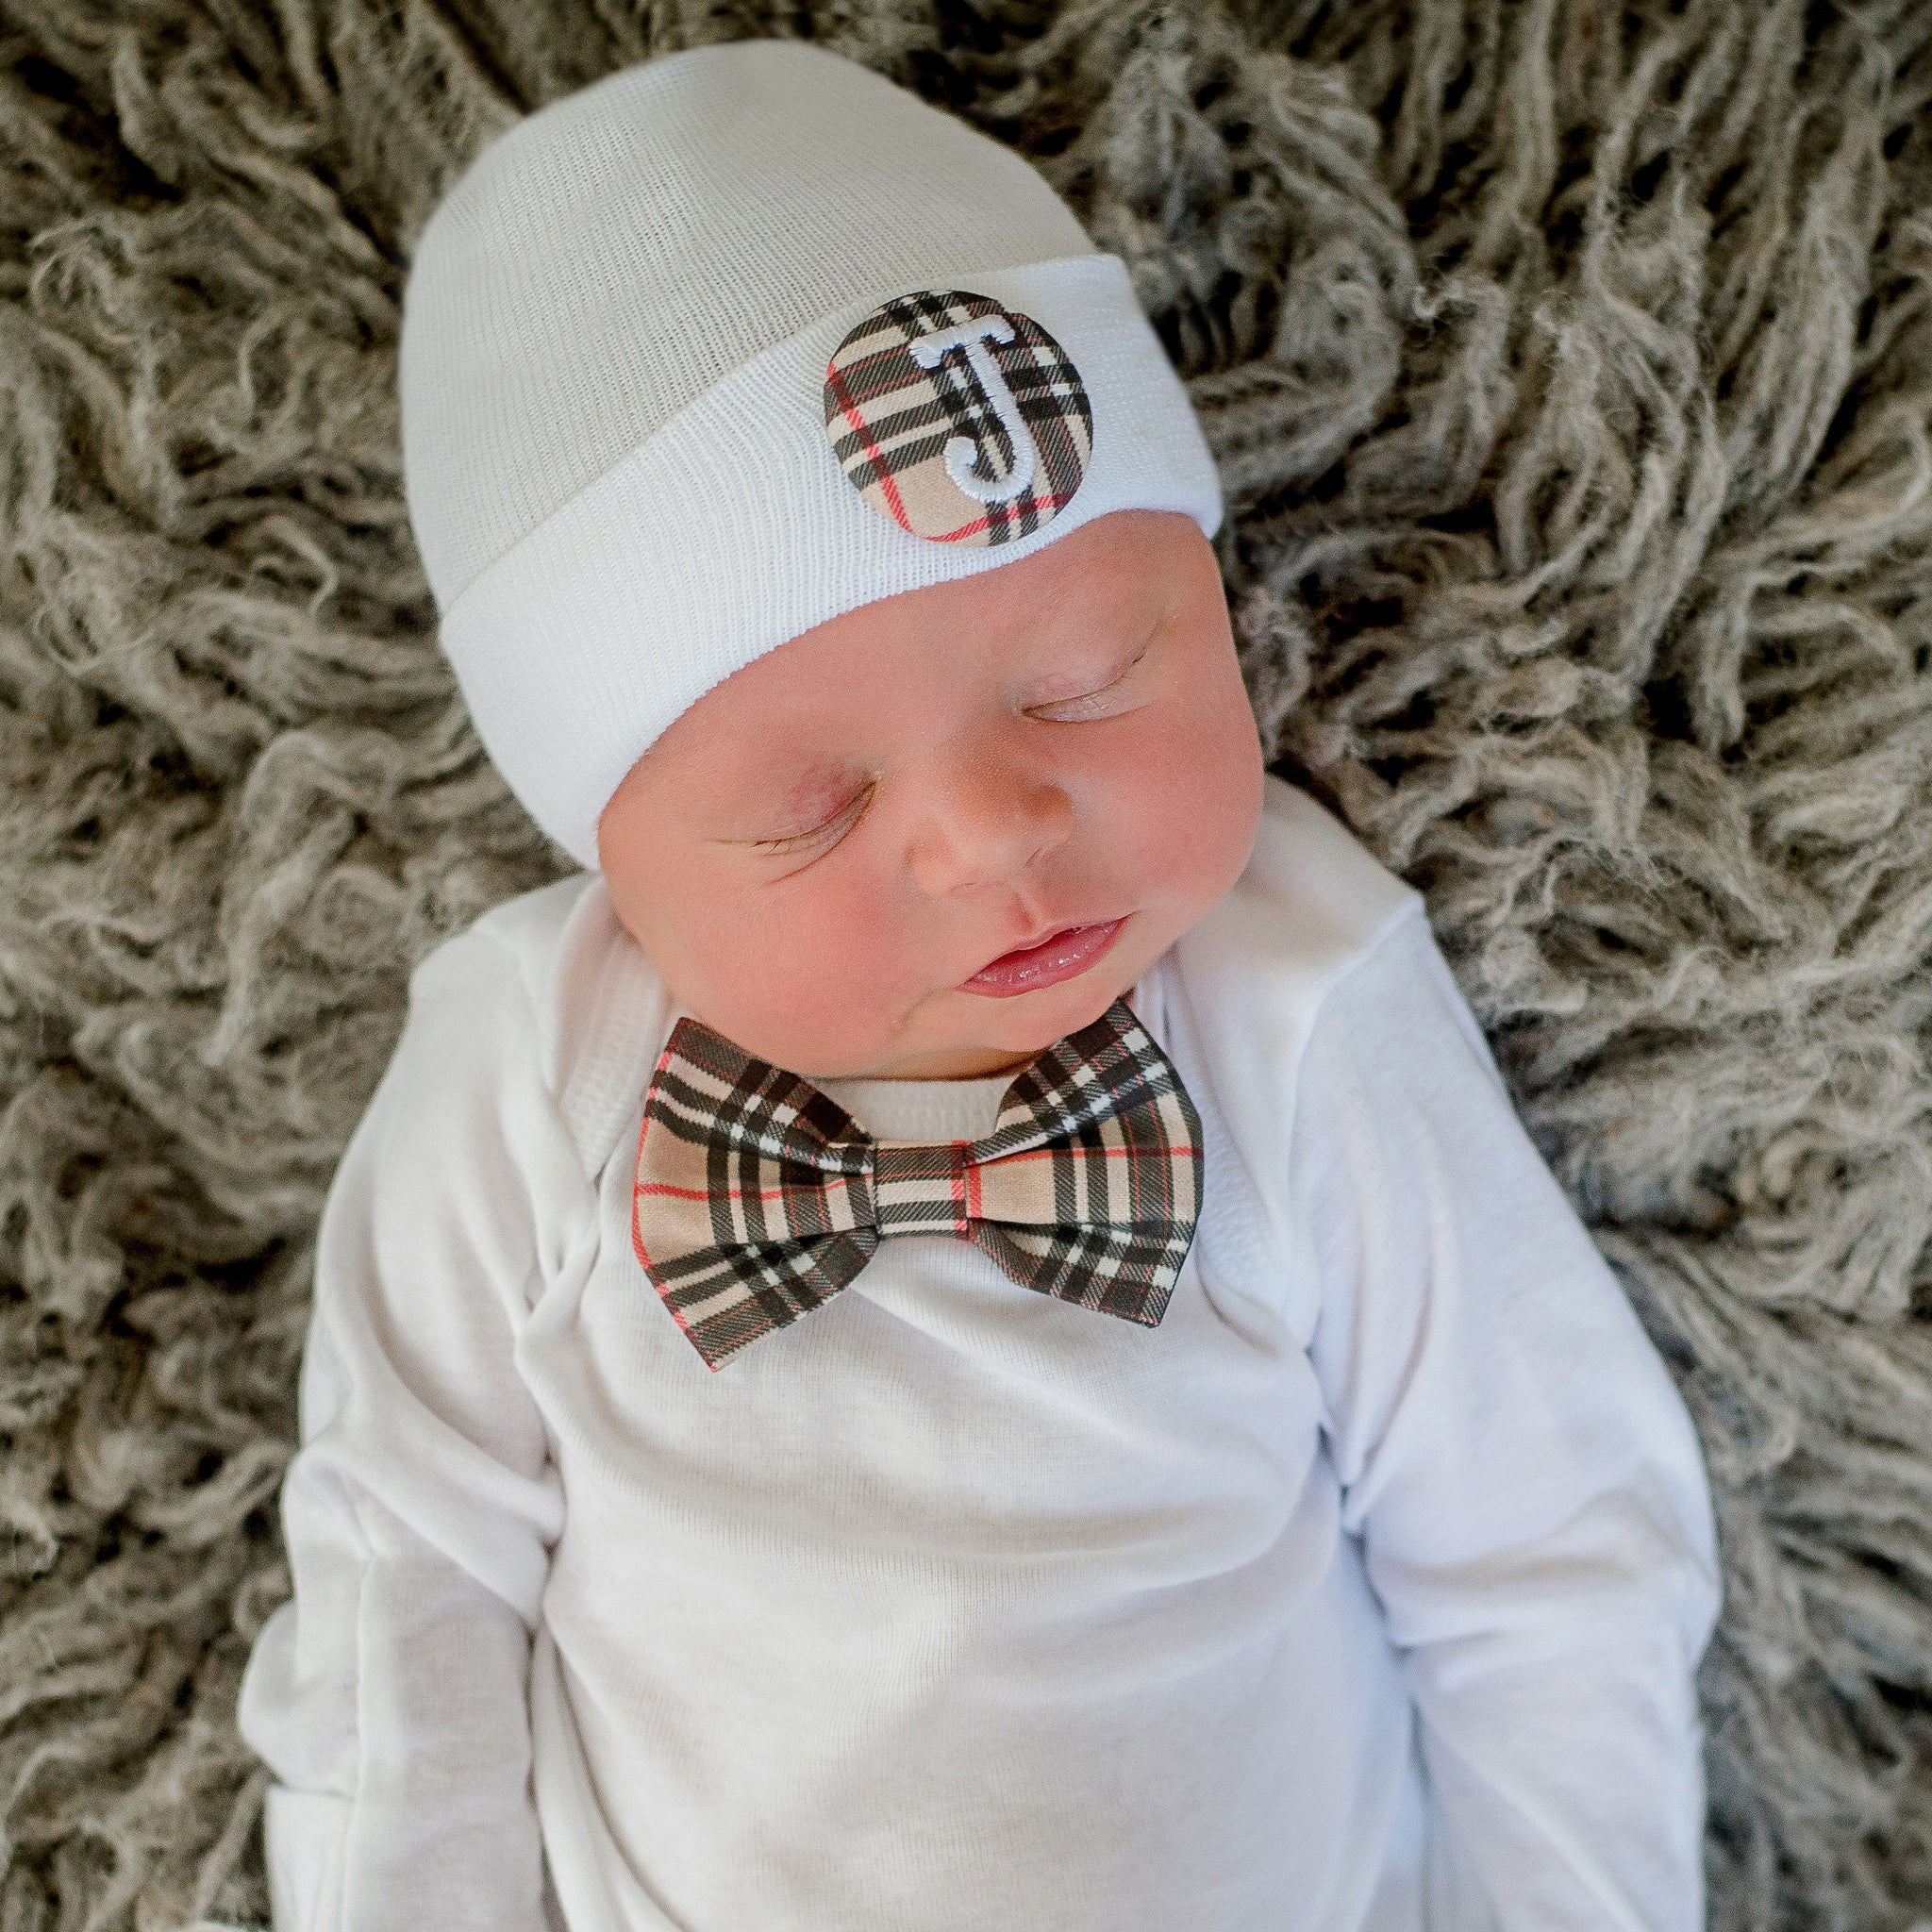 ilybean Fall Plaid Bow Tie Set For Newborn Boys - Hat with Plaid Button (inital optional) and matching White Onesie with Plaid Bowtie